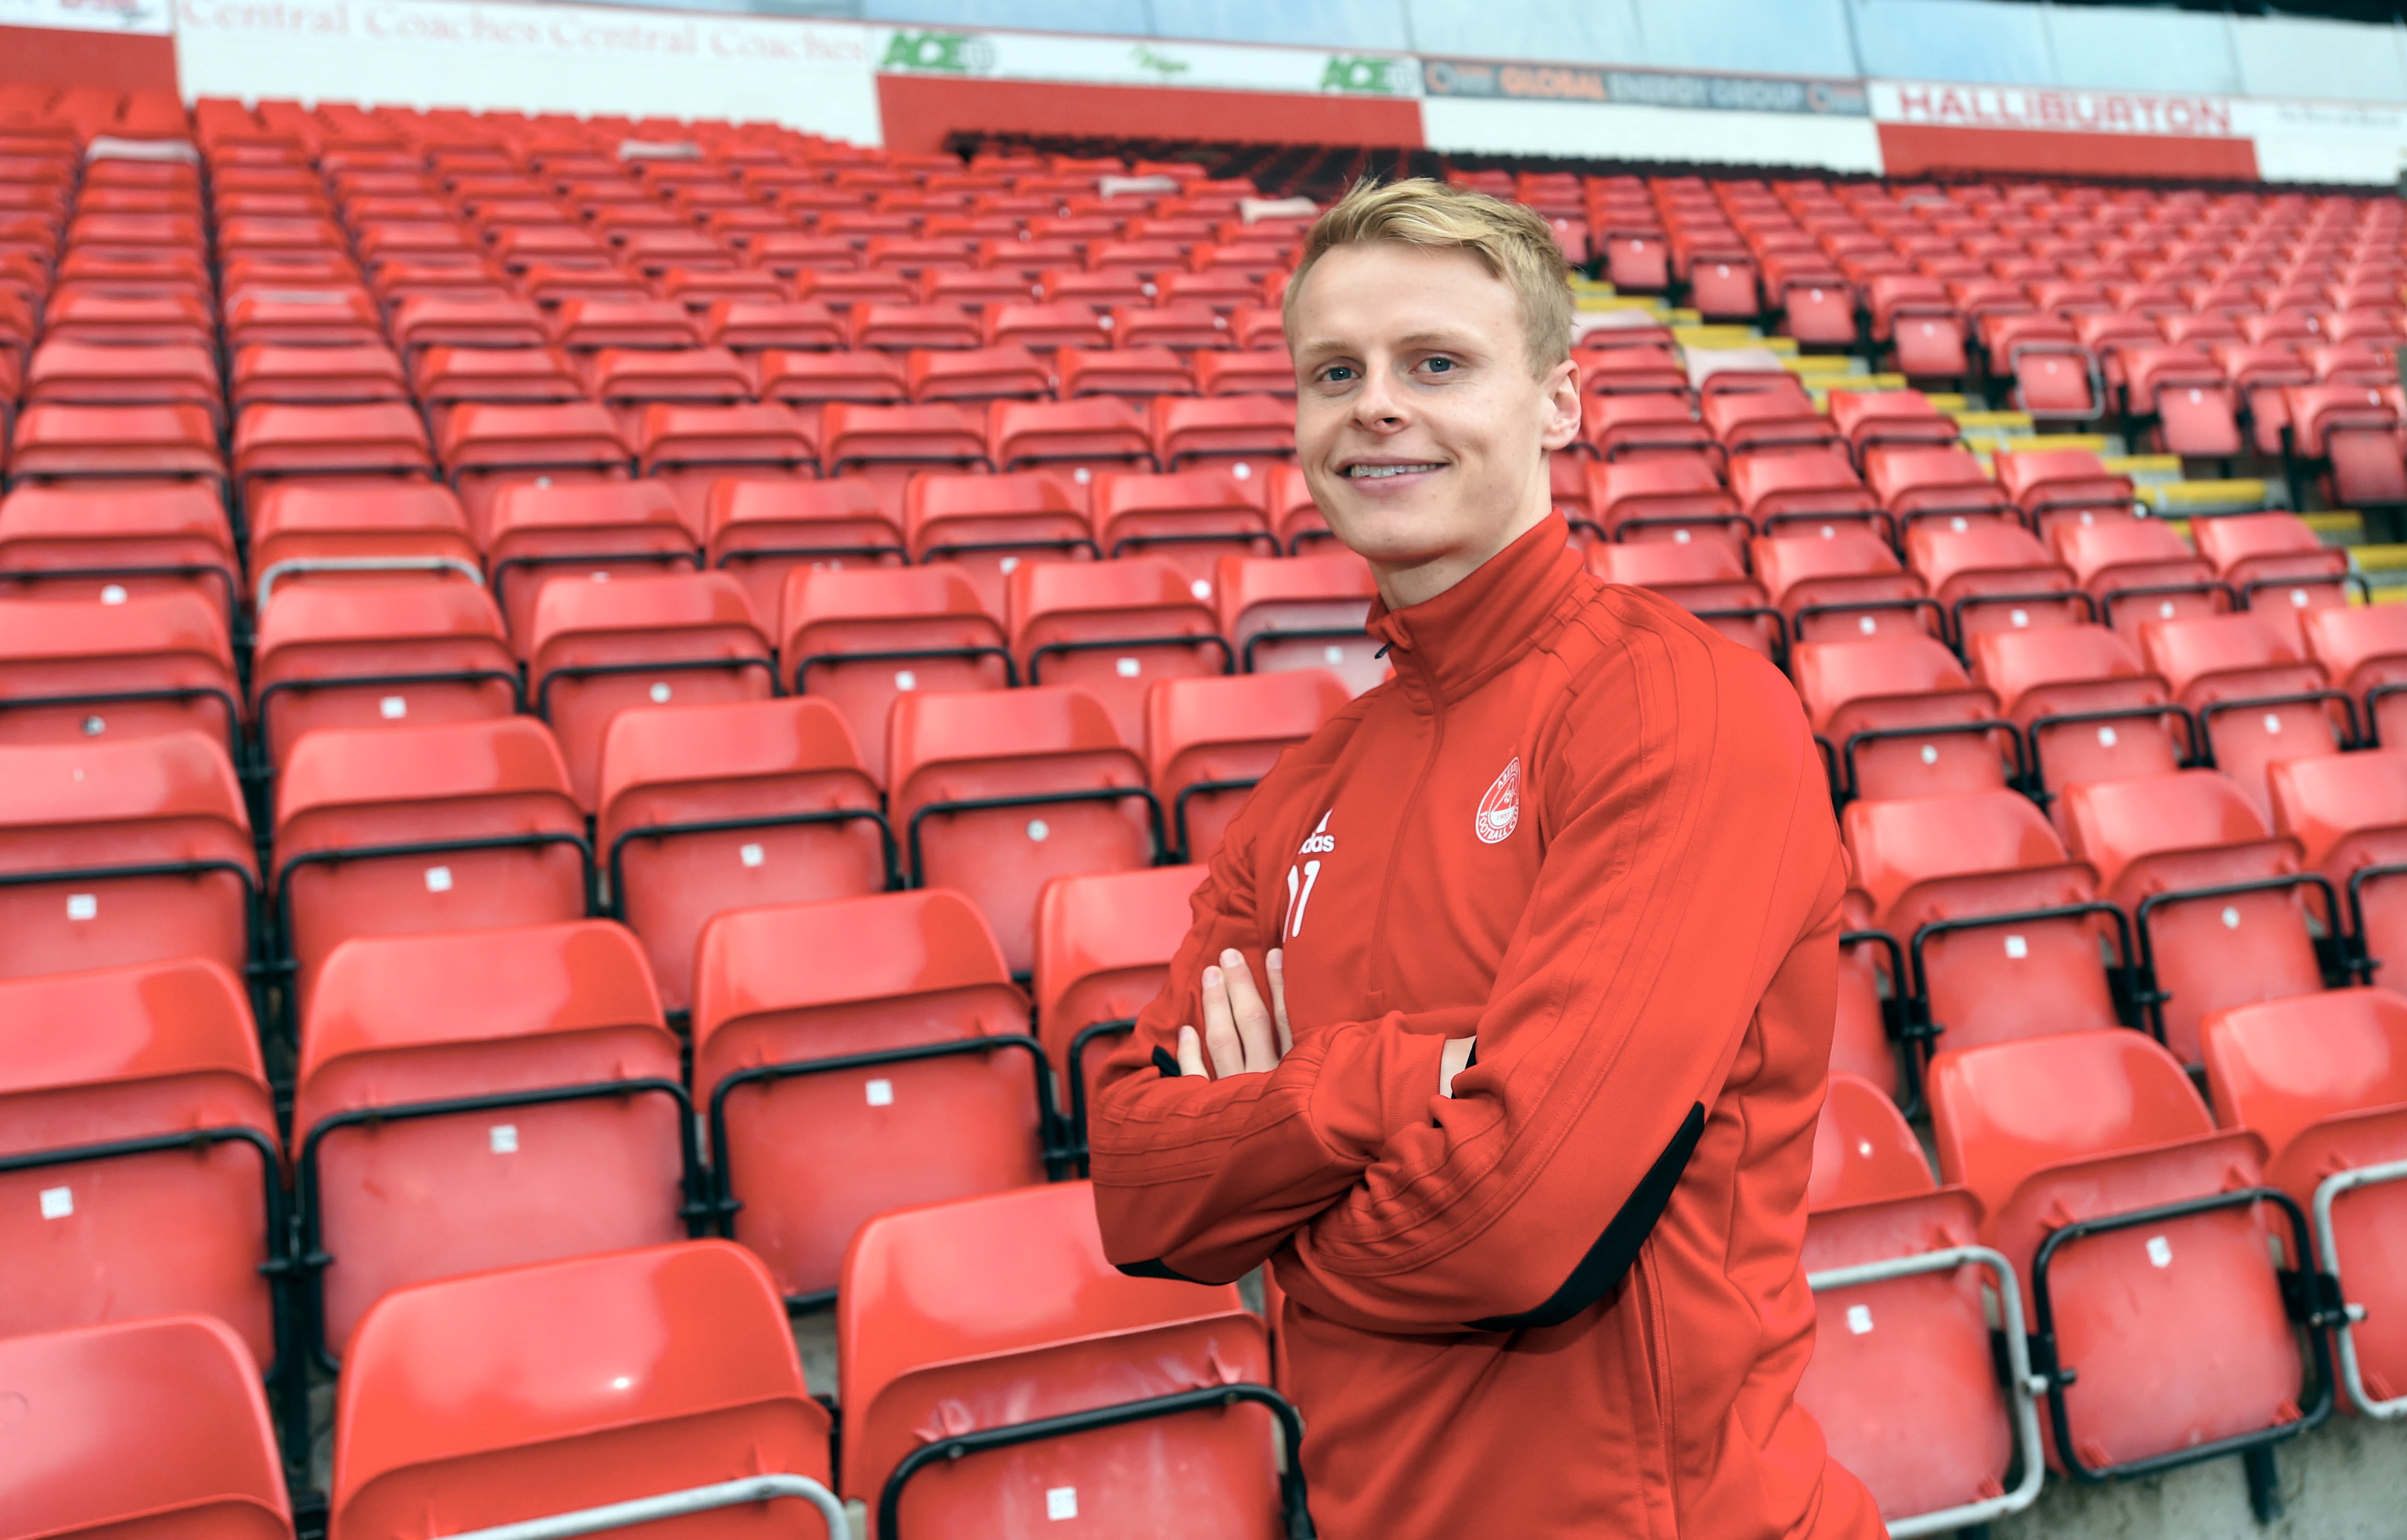 Gary Mackay-Steven has impressed in the early games this season.